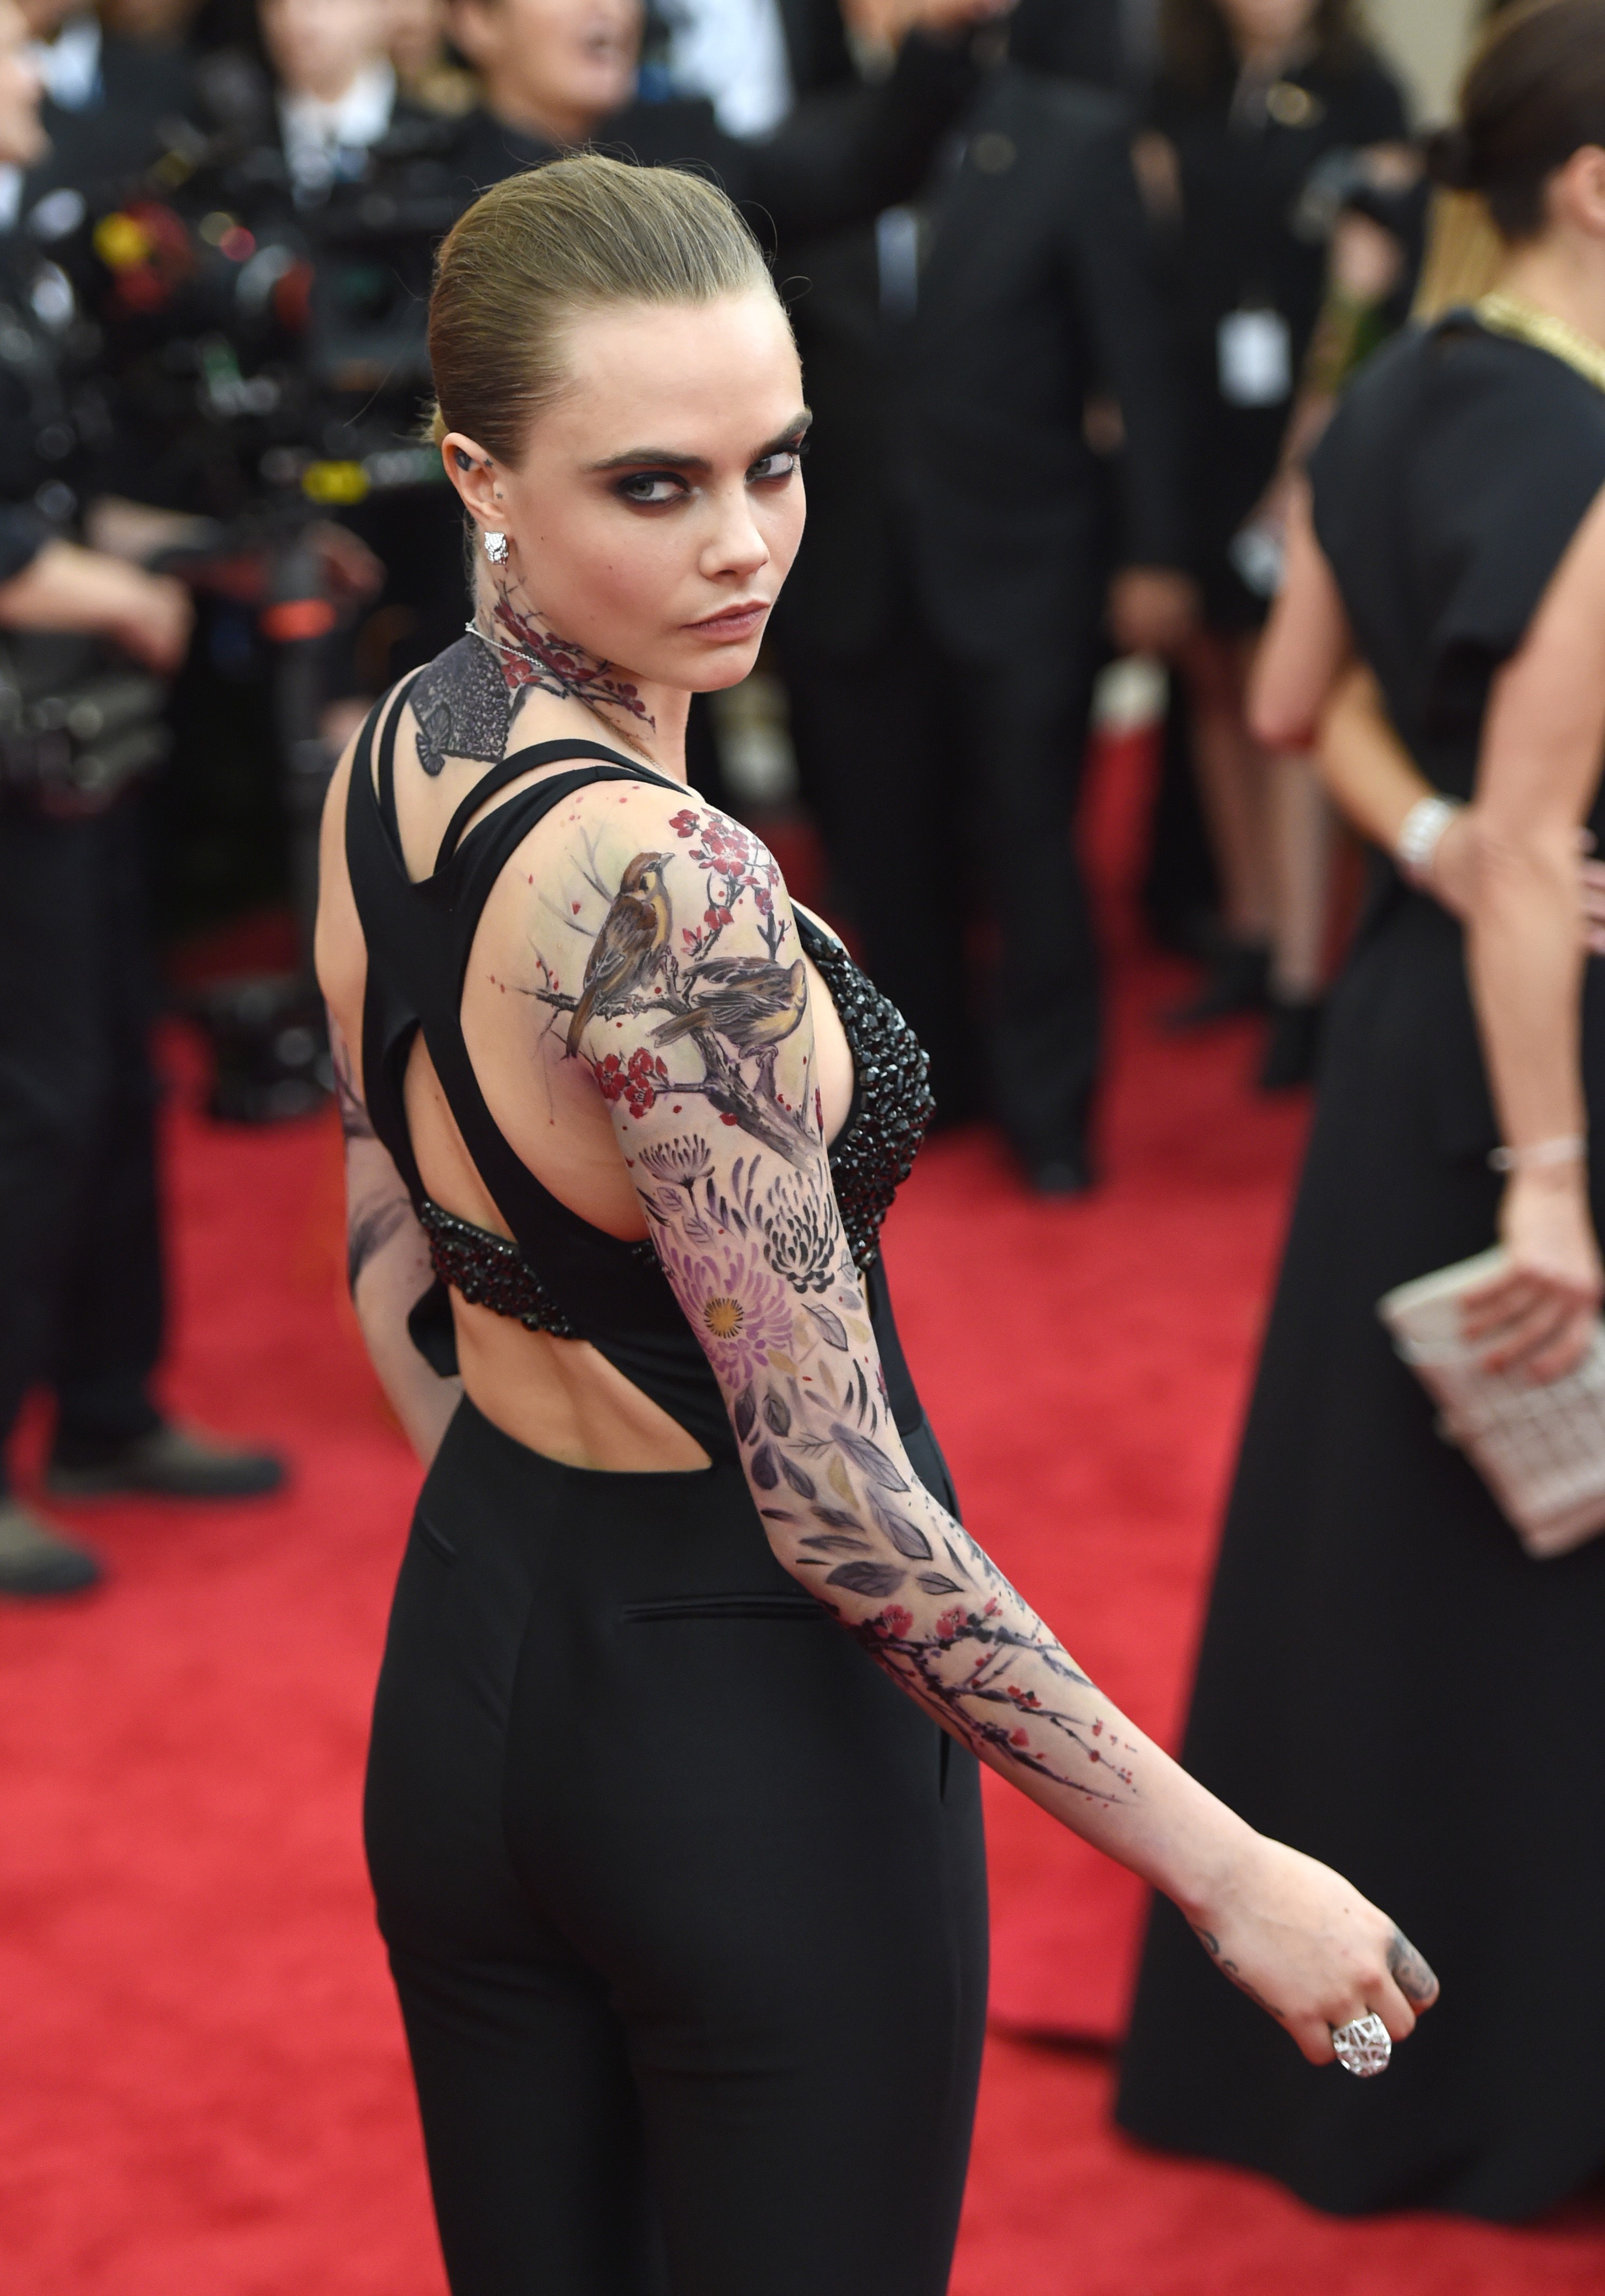 Cara Delevingne Skipped The 2016 Met Gala, But It Was For A Good Reason